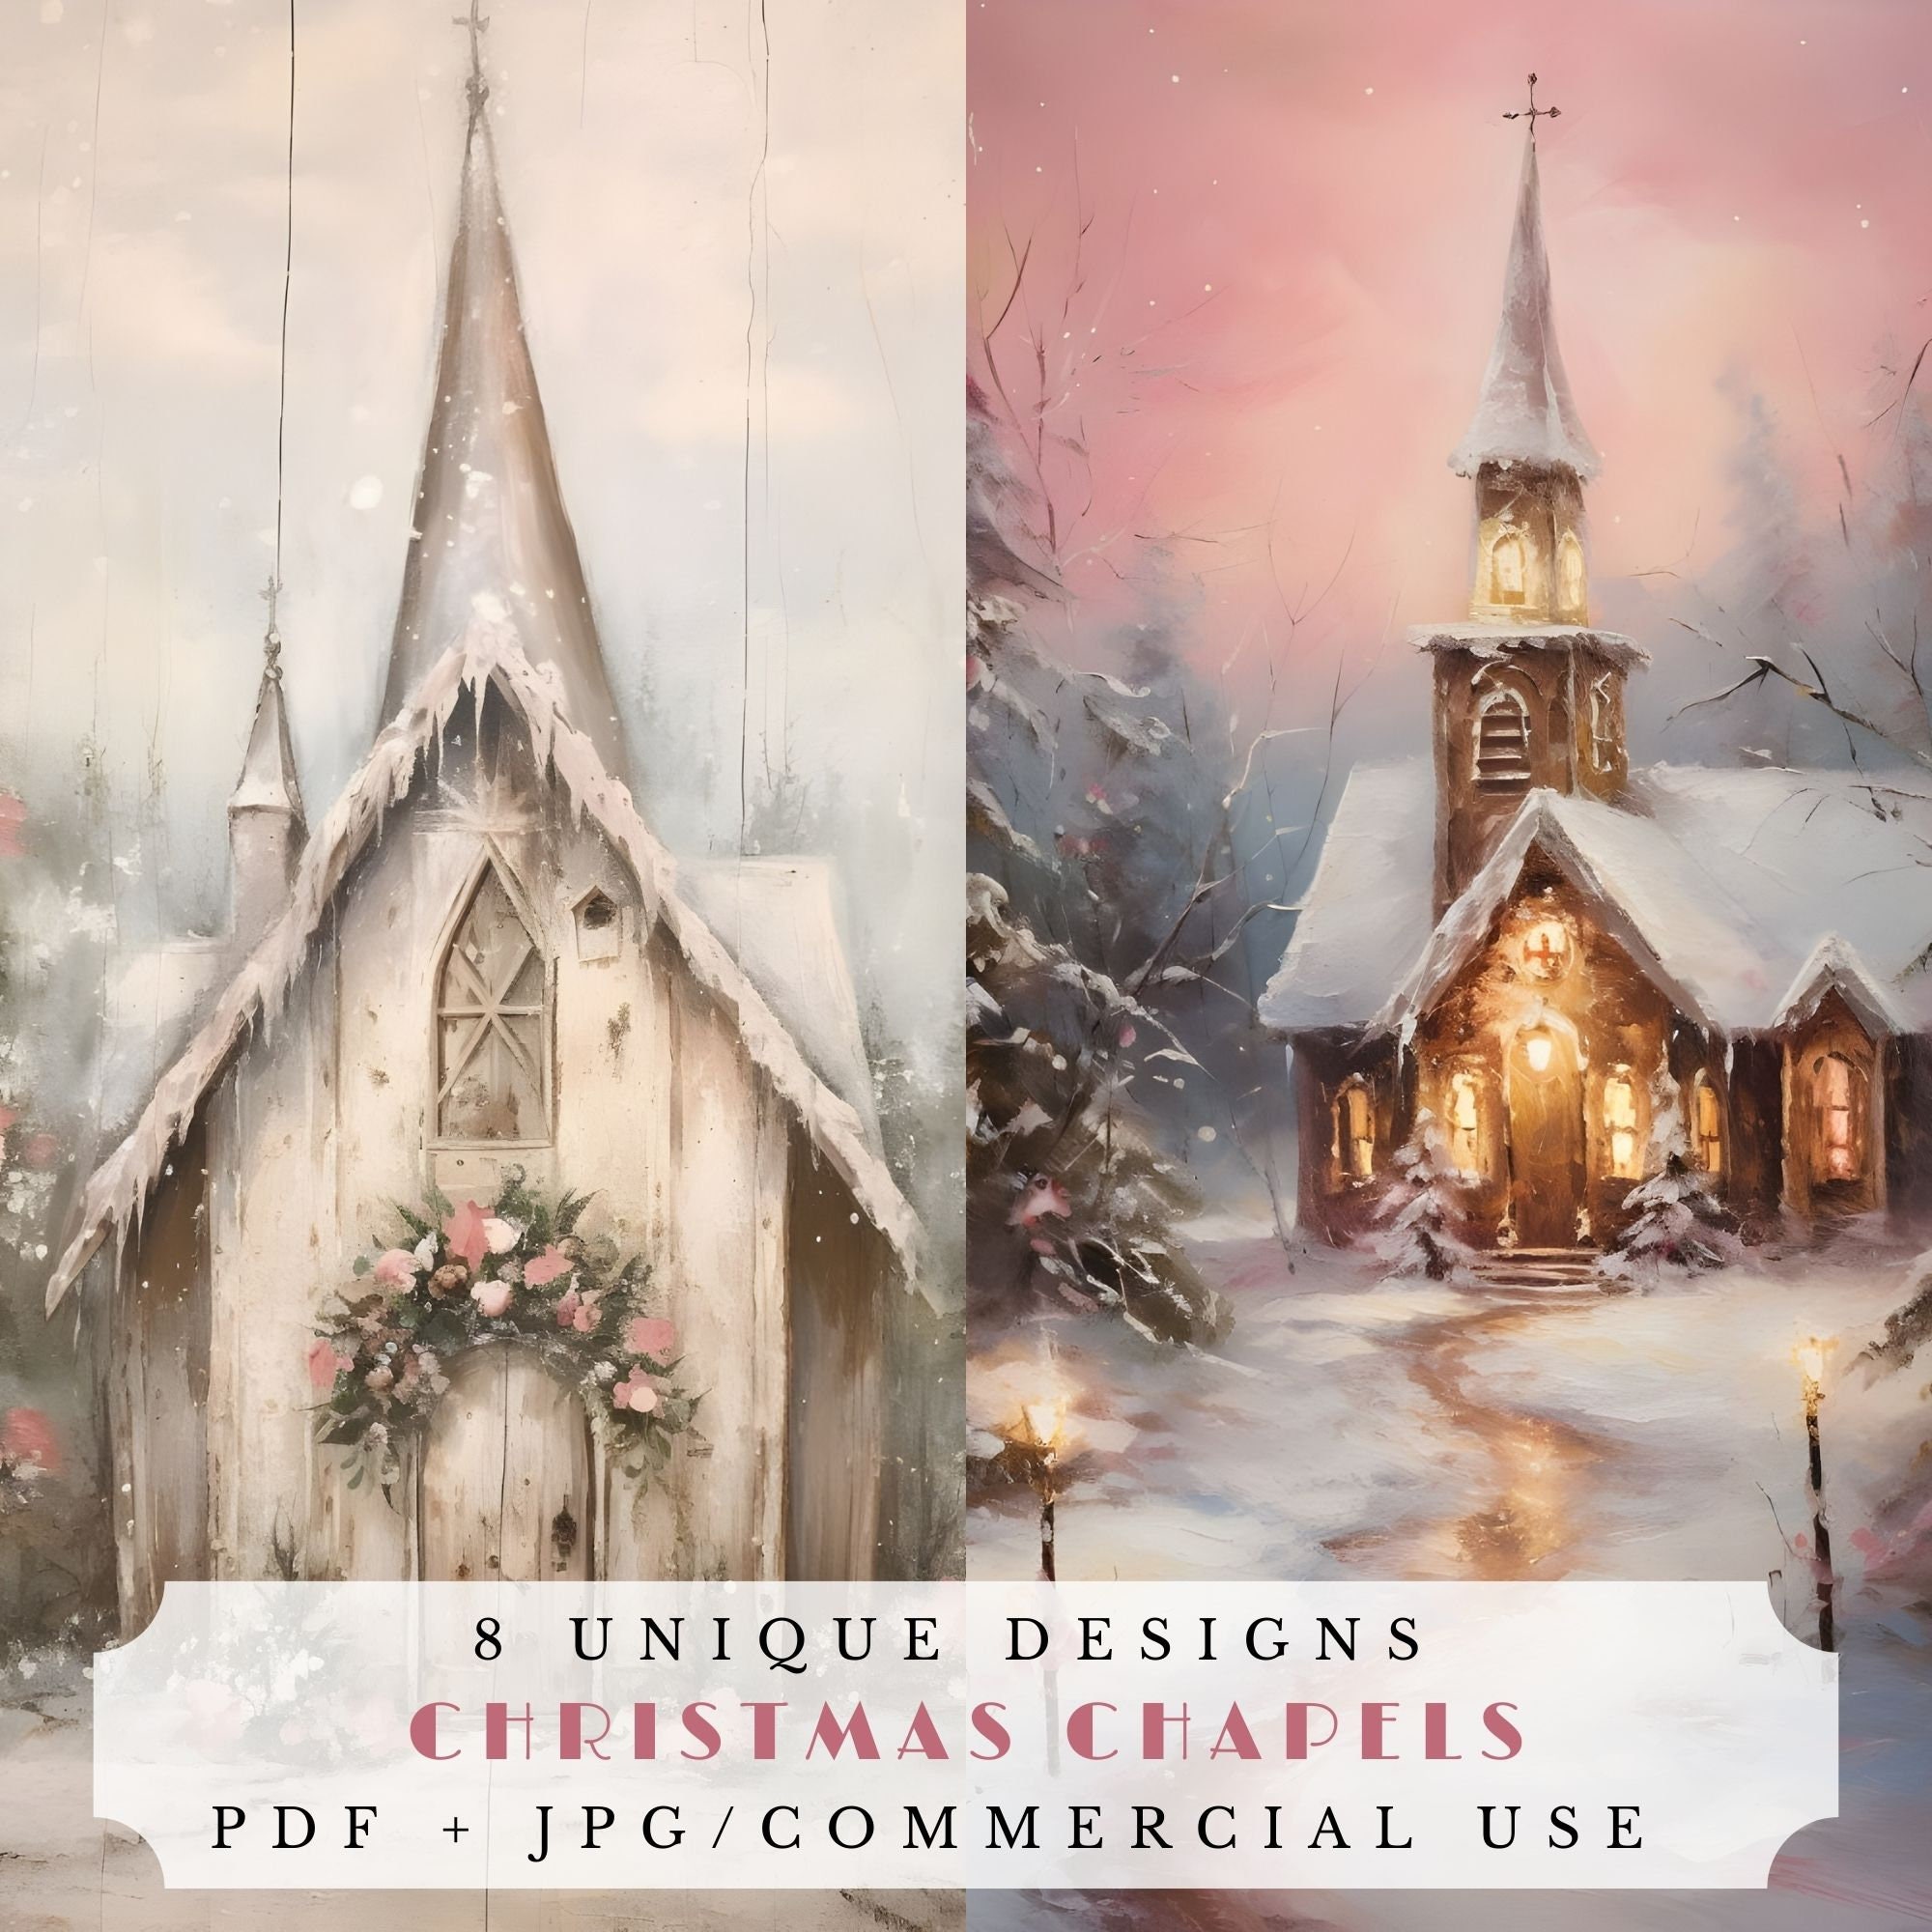 Night Sky Painting Christmas Painting White Church Painting Snow Landscape  Winter Print Snow Scene Star Print Matted Print 